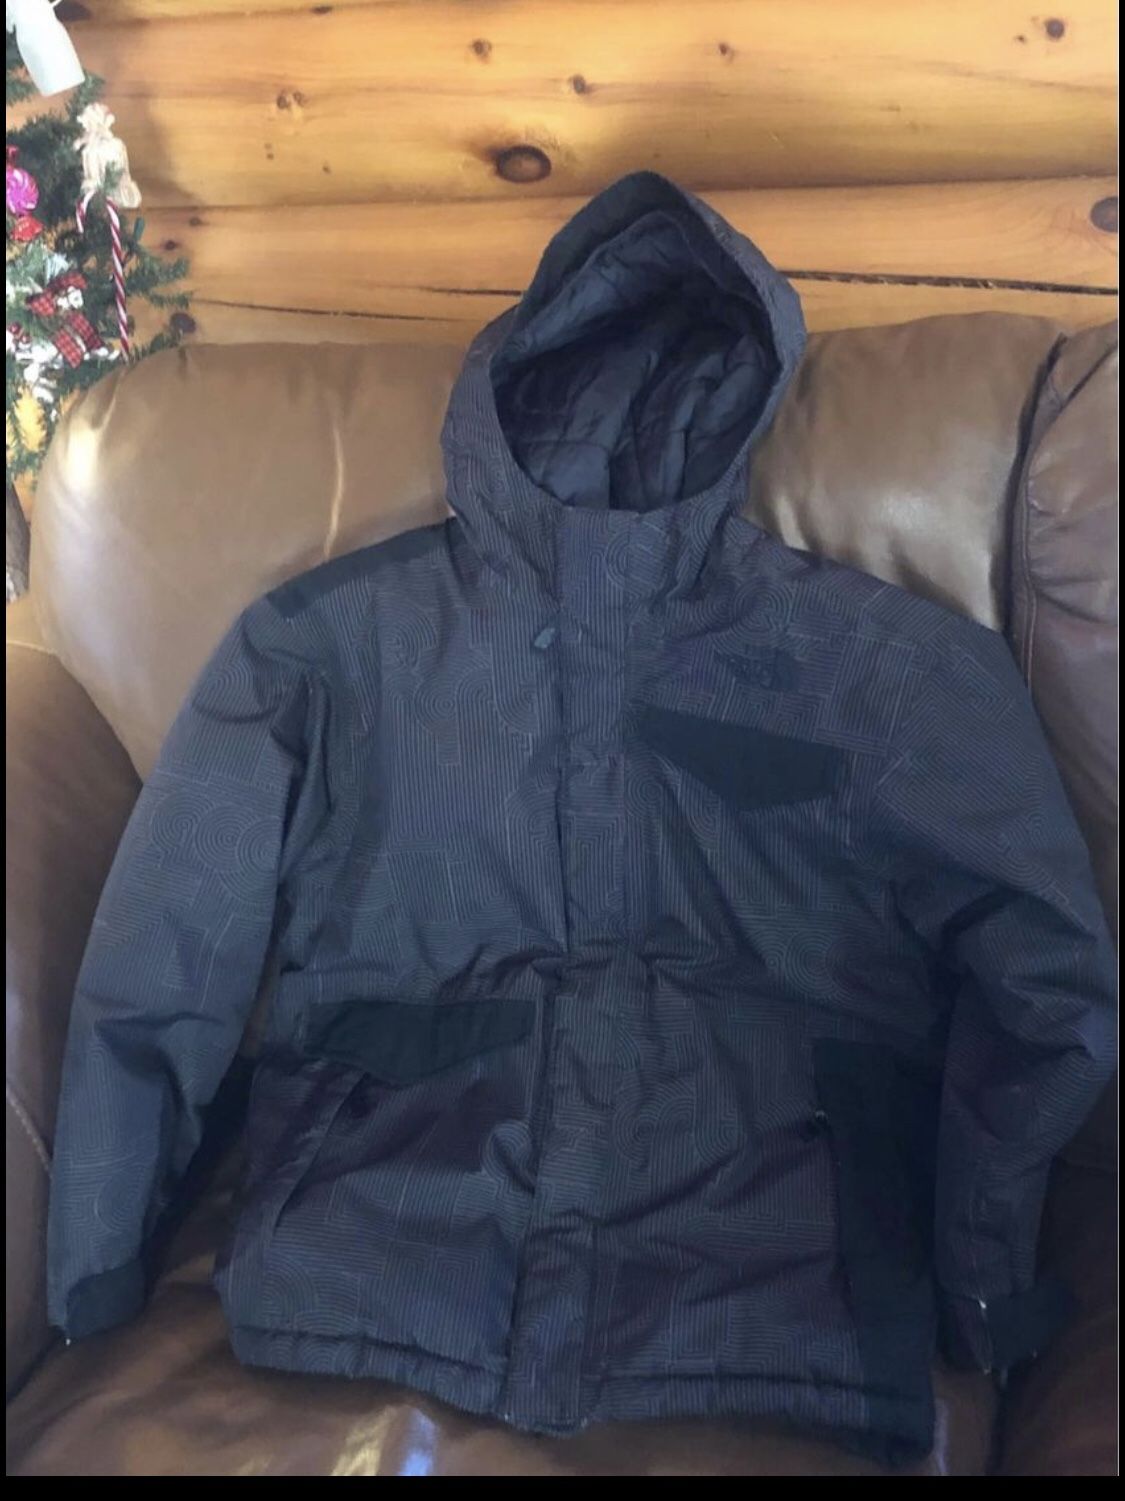 The North Face Kids Garcons Black/Gray Hooded Jacket size 10/12